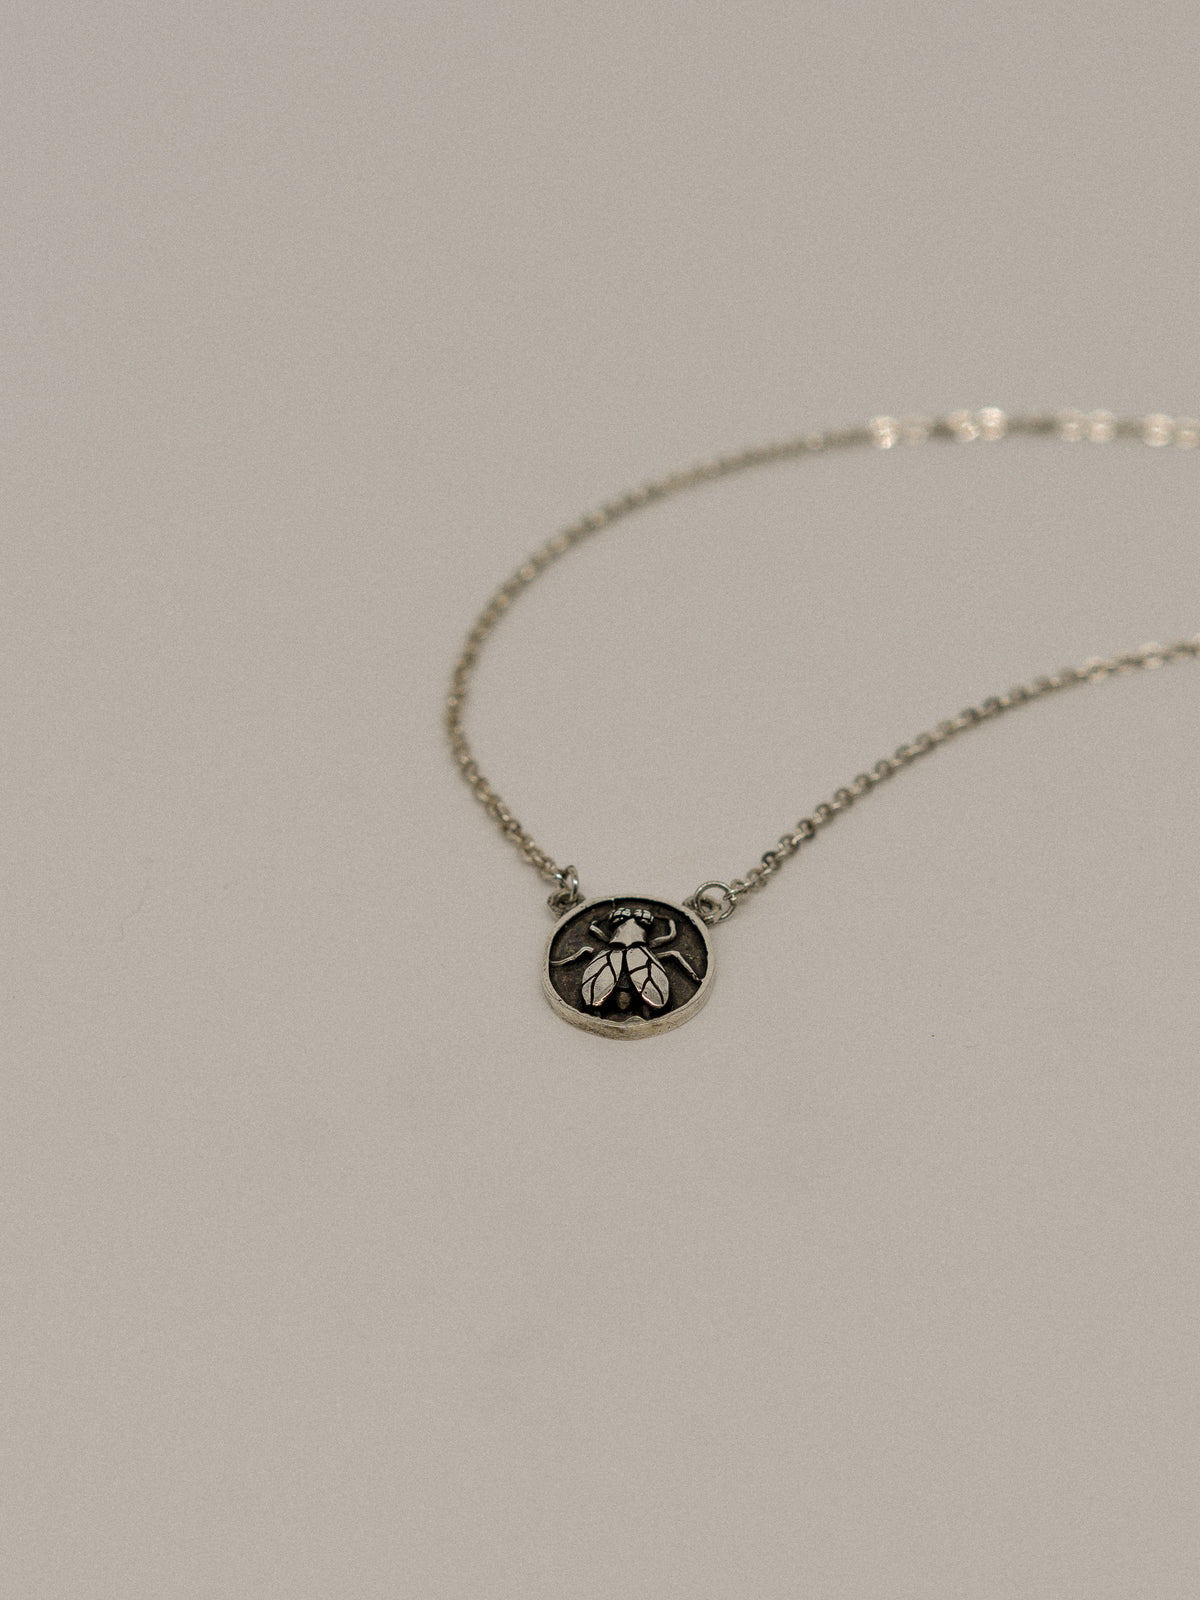 Fly pendant (With Chain)